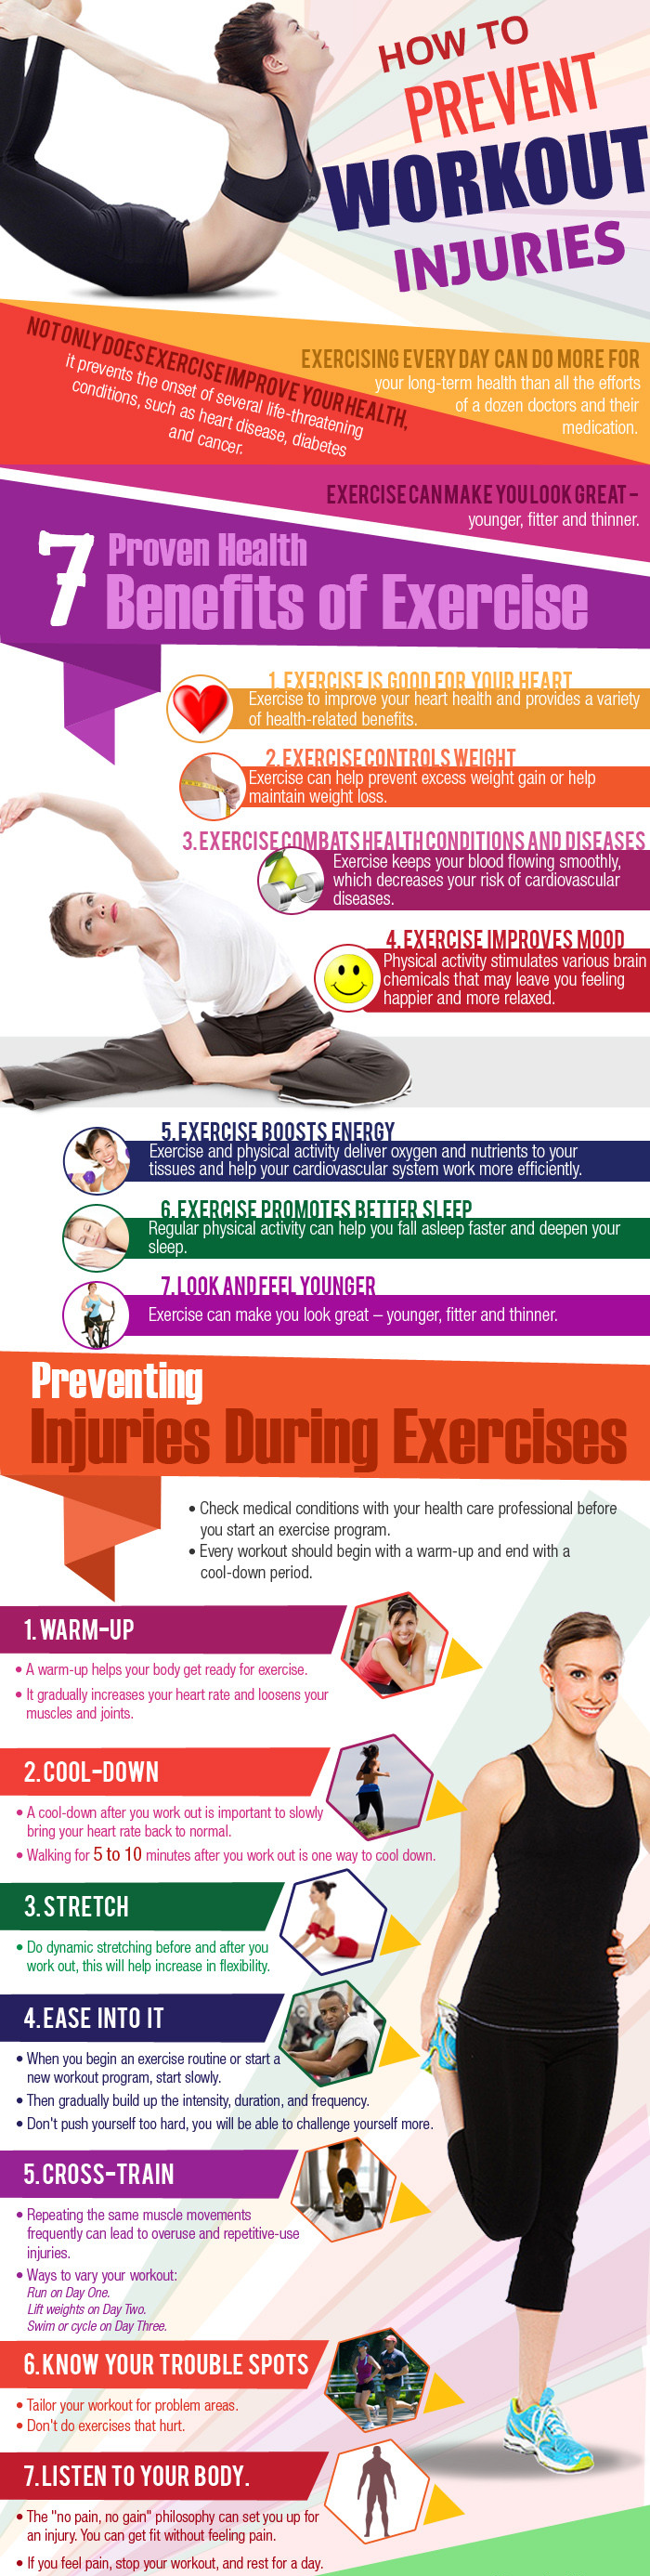 5 tips to avoid injuries while exercising